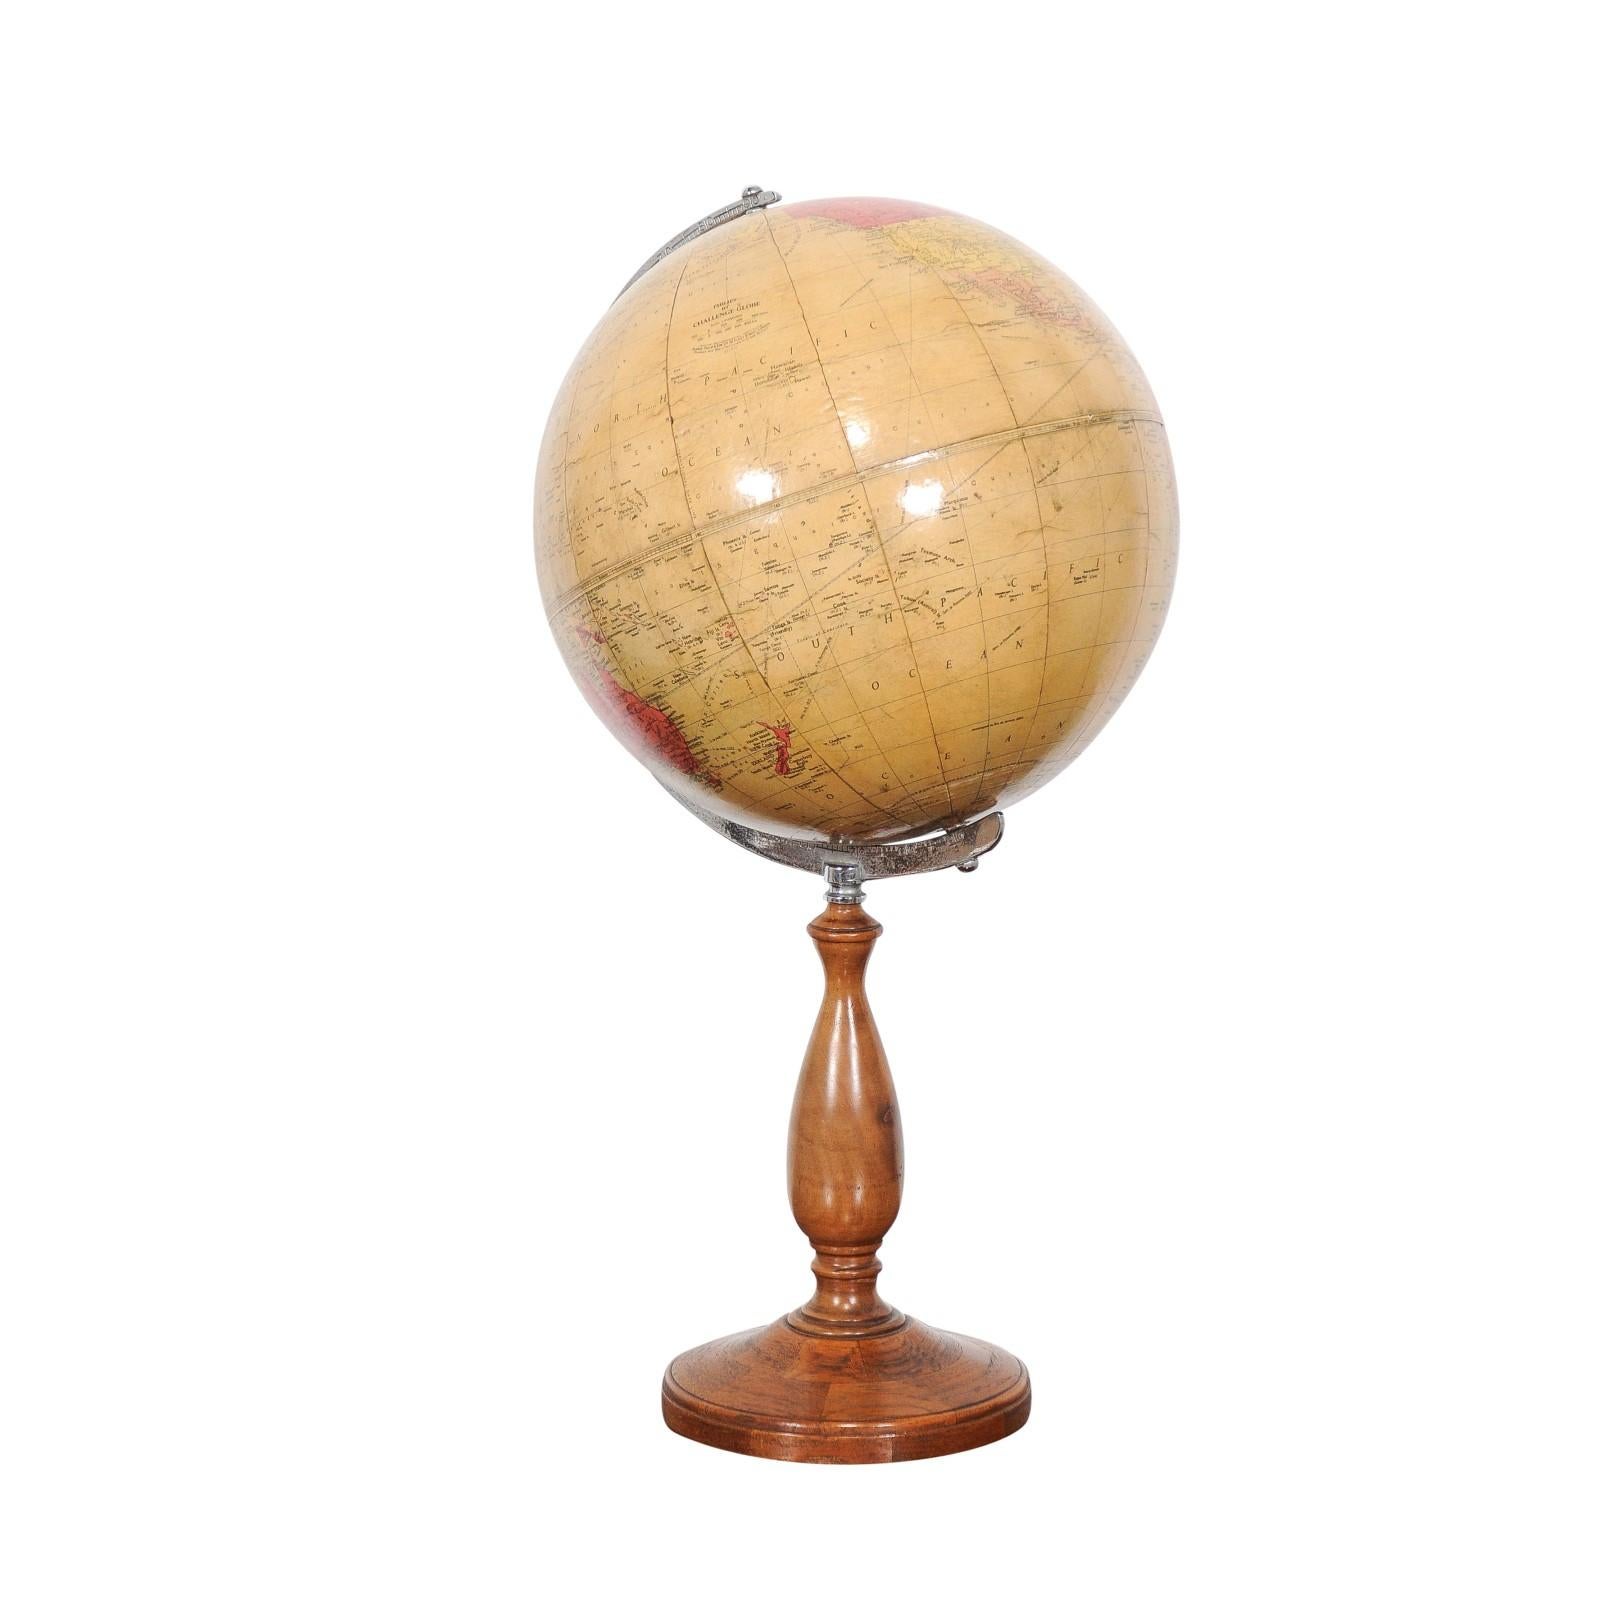 An English Philips Challenge globe from the second quarter of the 20th century mounted on a walnut base. Journey through time with this English Philips Challenge globe from the second quarter of the 20th century, a captivating piece that marries